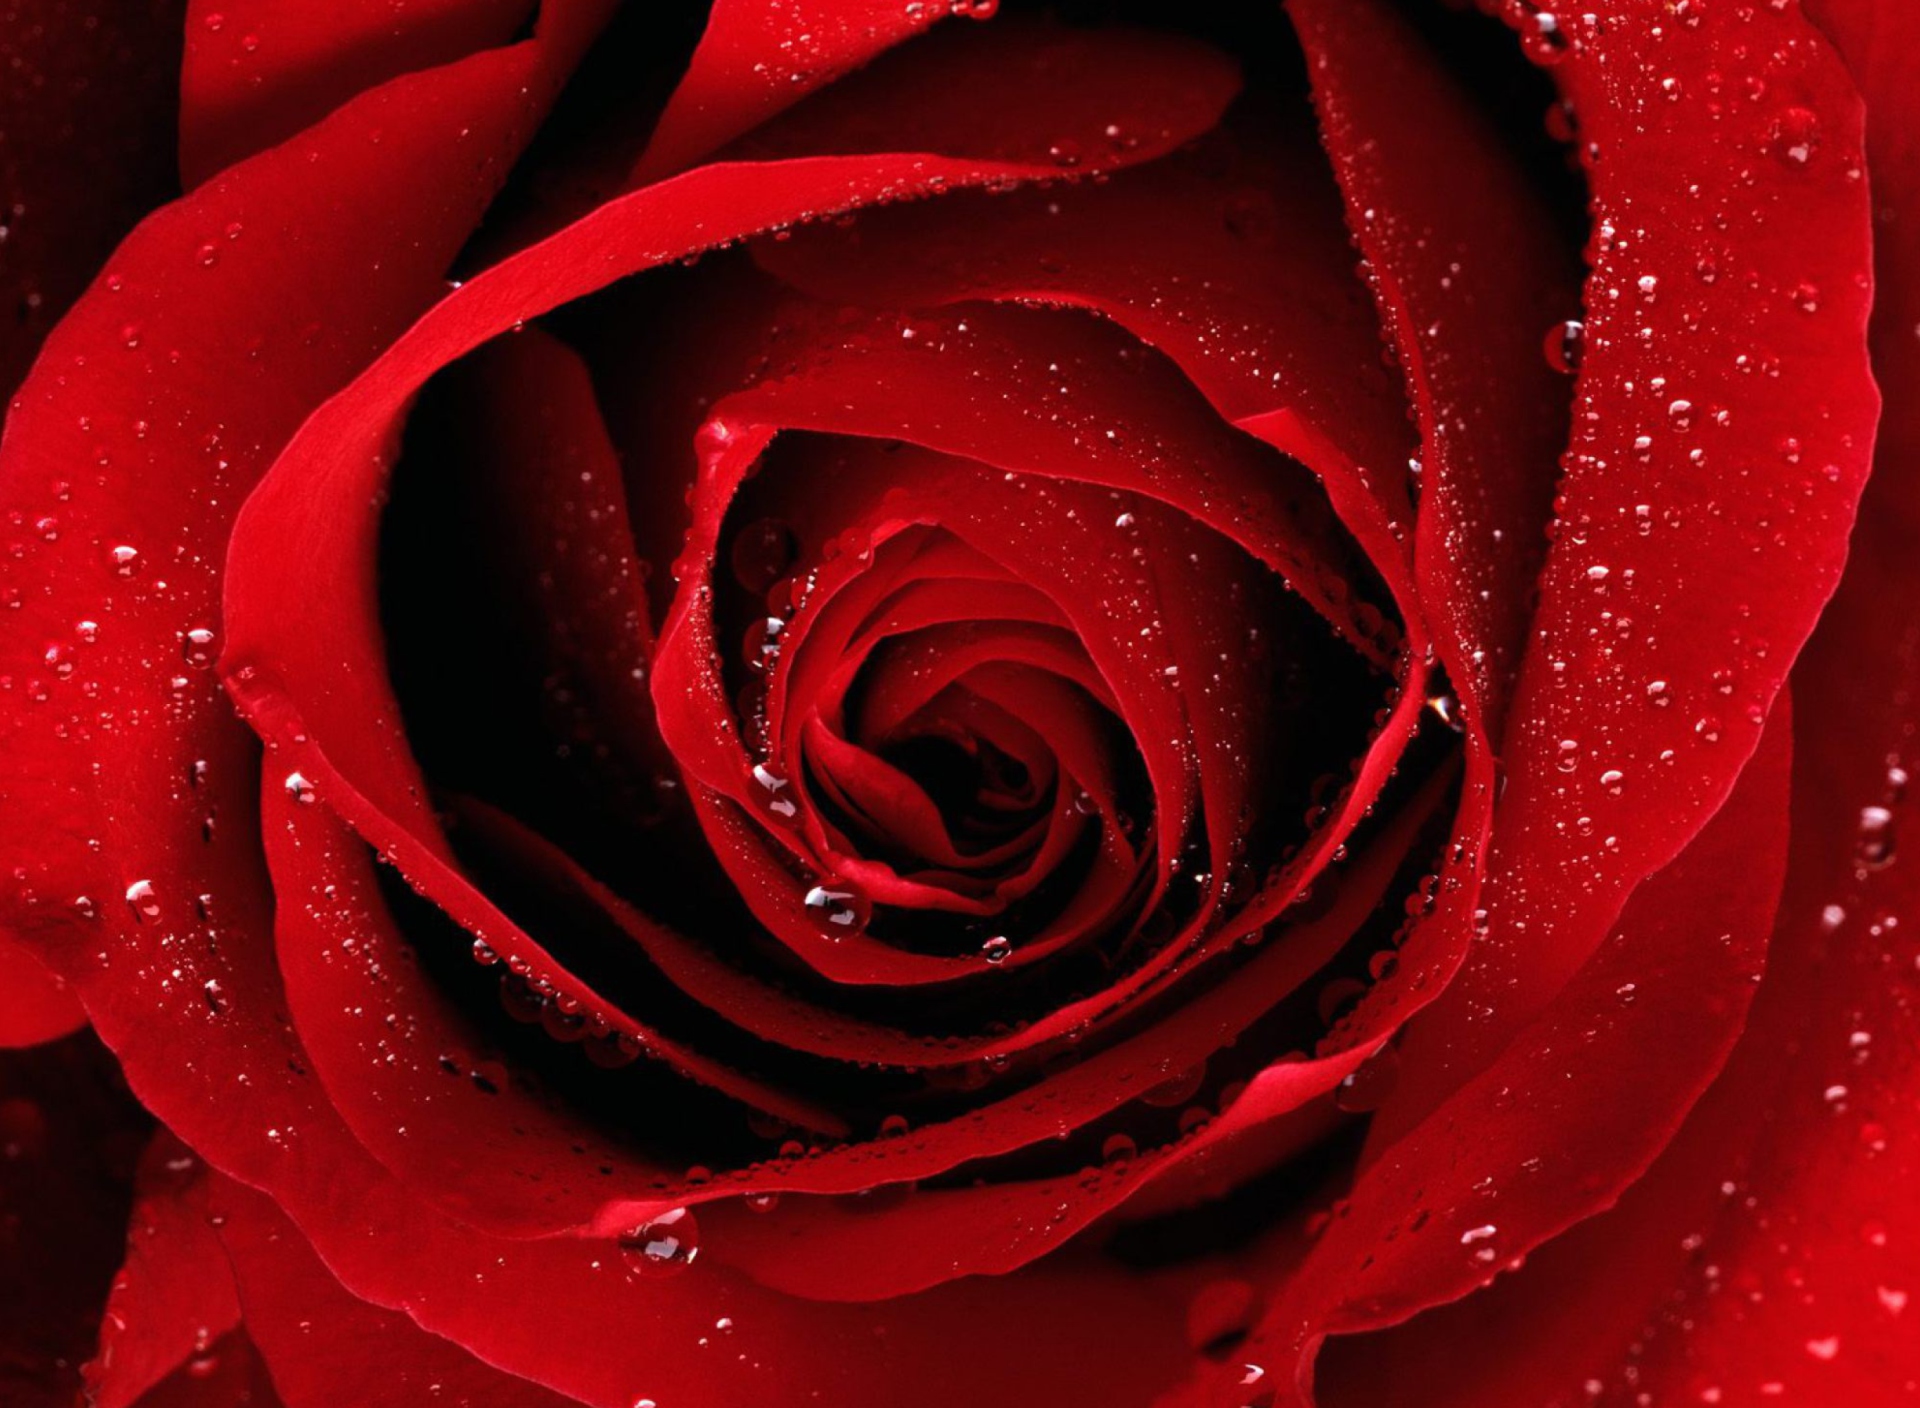 Sfondi Scarlet Rose With Water Drops 1920x1408